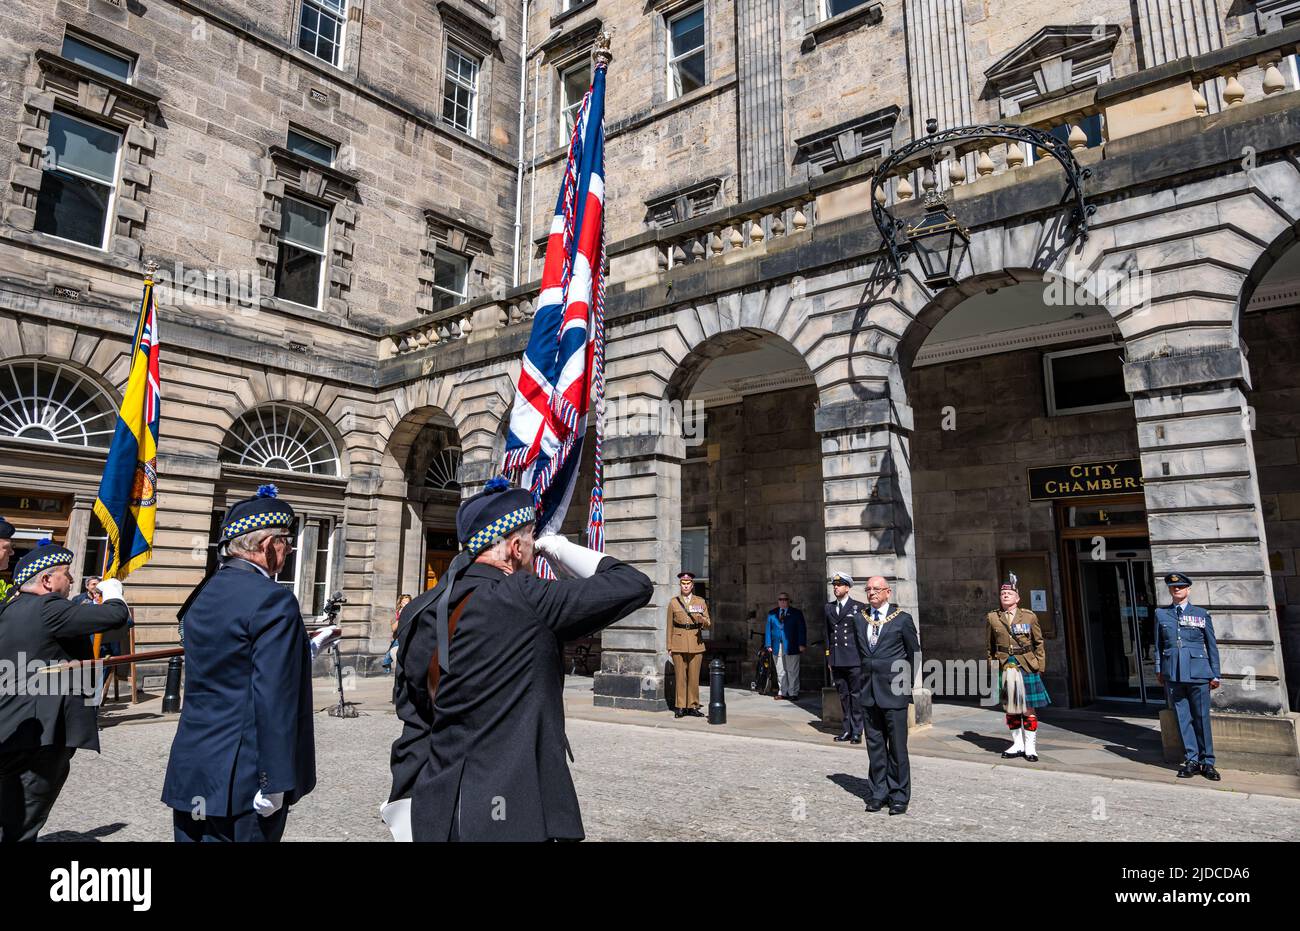 City Chambers, Edinburgh, Scotland, United Kingdom, 20 June 2022. Armed Forces flag raising ceremony: A procession with Armed Forces Day flag is met by Lord Provost Robert Aldridge at City Chambers with a Parade Marshall, standard bearers & Eddie Maley carrying the flag plus guests Lt Cdr Will McLeman (Royal Navy) Garrison Commander Lt Col Lorne Campbell (British Army) & Squadron Leader Derek Read (Royal Air Force). The Flag Raising Ceremony is a national event to honour Armed Forces personnel Stock Photo